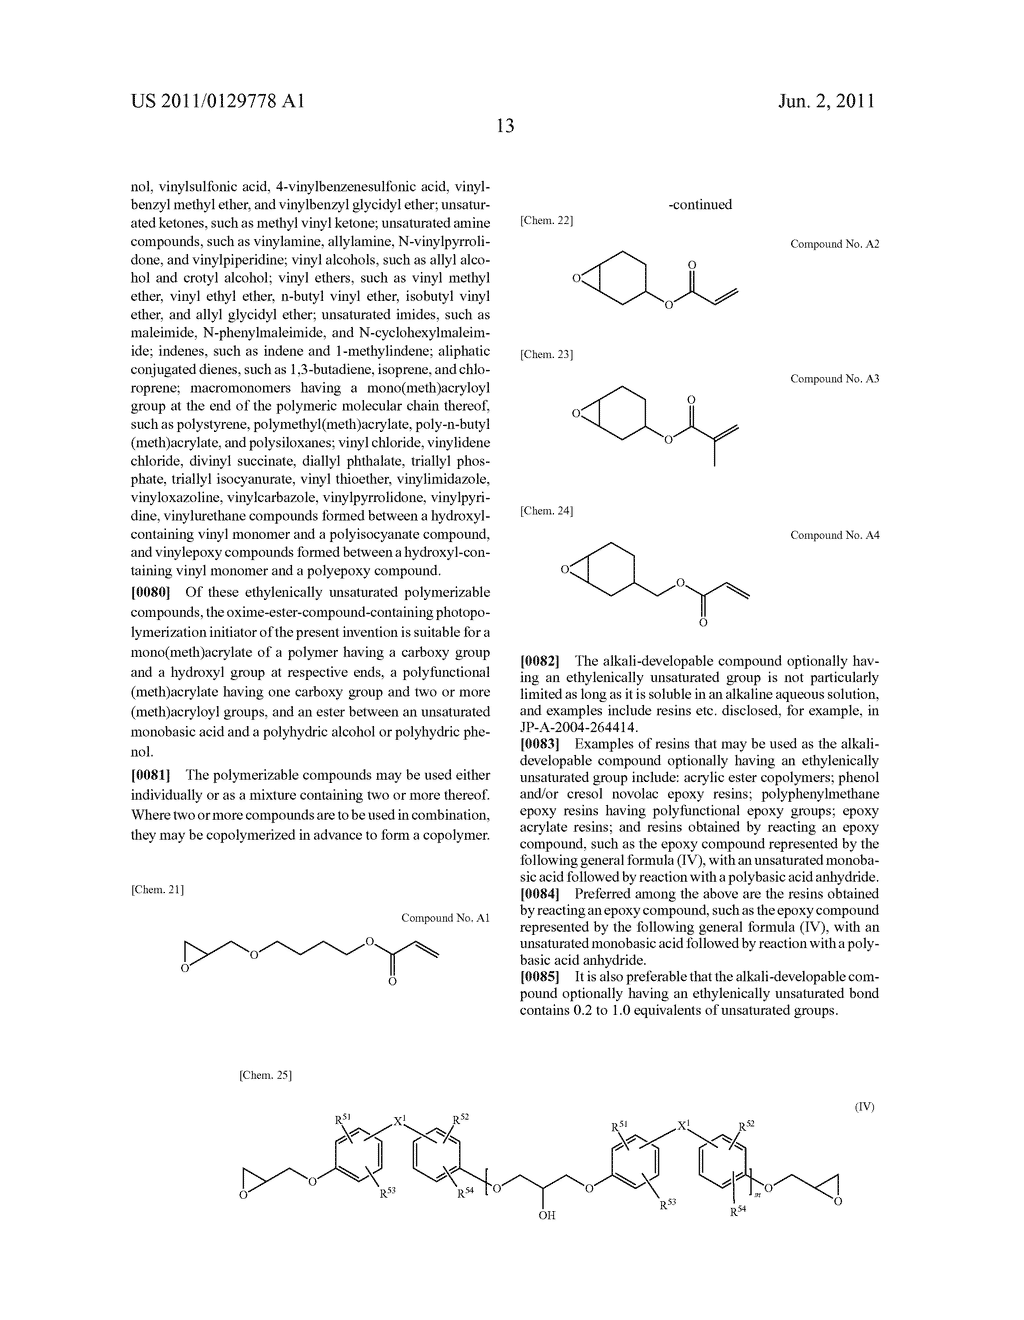 OXIME ESTER COMPOUND AND PHOTOPOLYMERIZATION INITIATOR CONTAINING THE SAME - diagram, schematic, and image 14